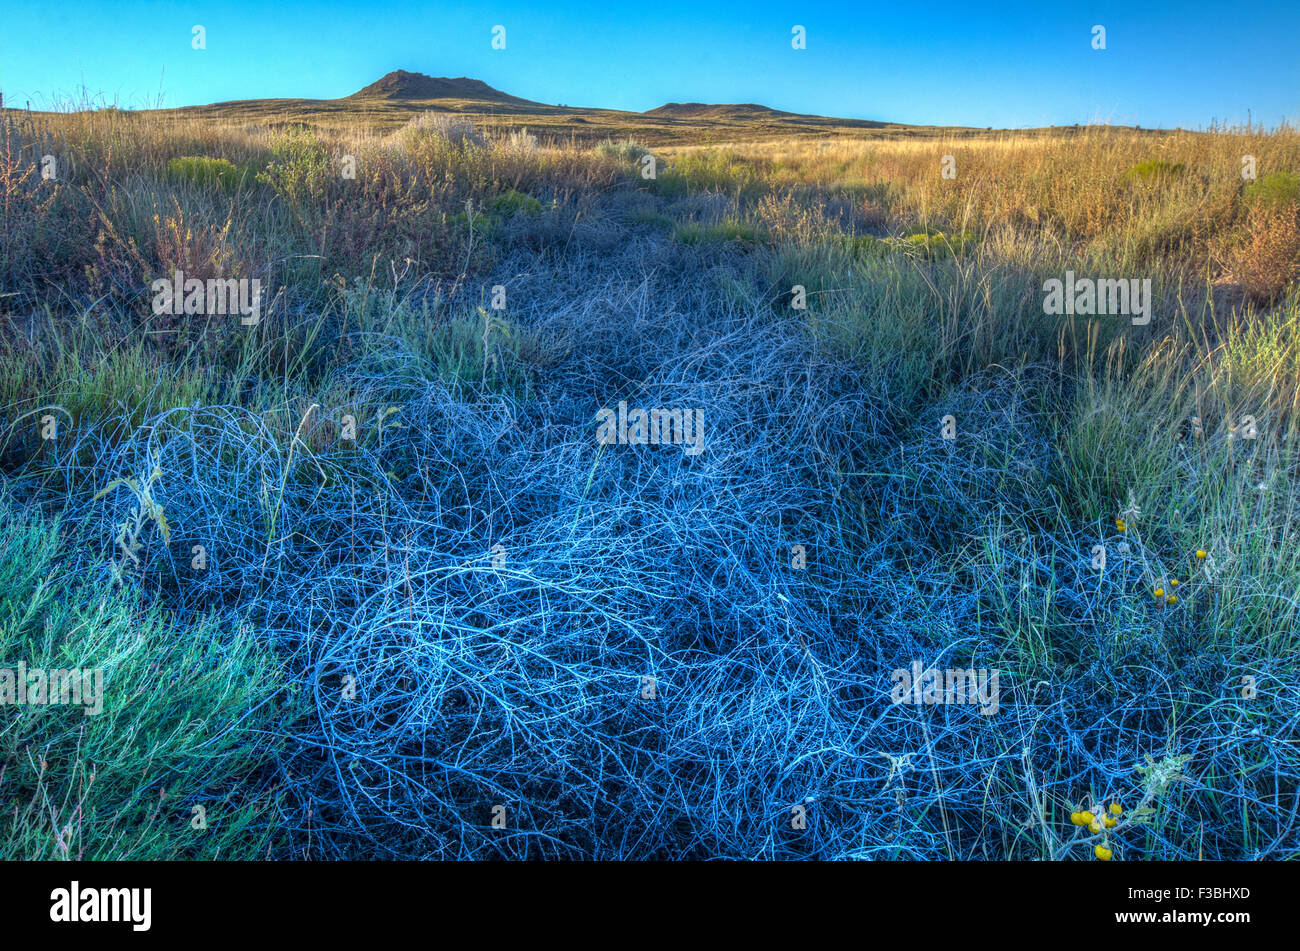 Dried Tumbleweeds caught in a small arroyo, Volcanoes Day Use Area, Petroglyph National Monument, New Mexico, USA. Stock Photo